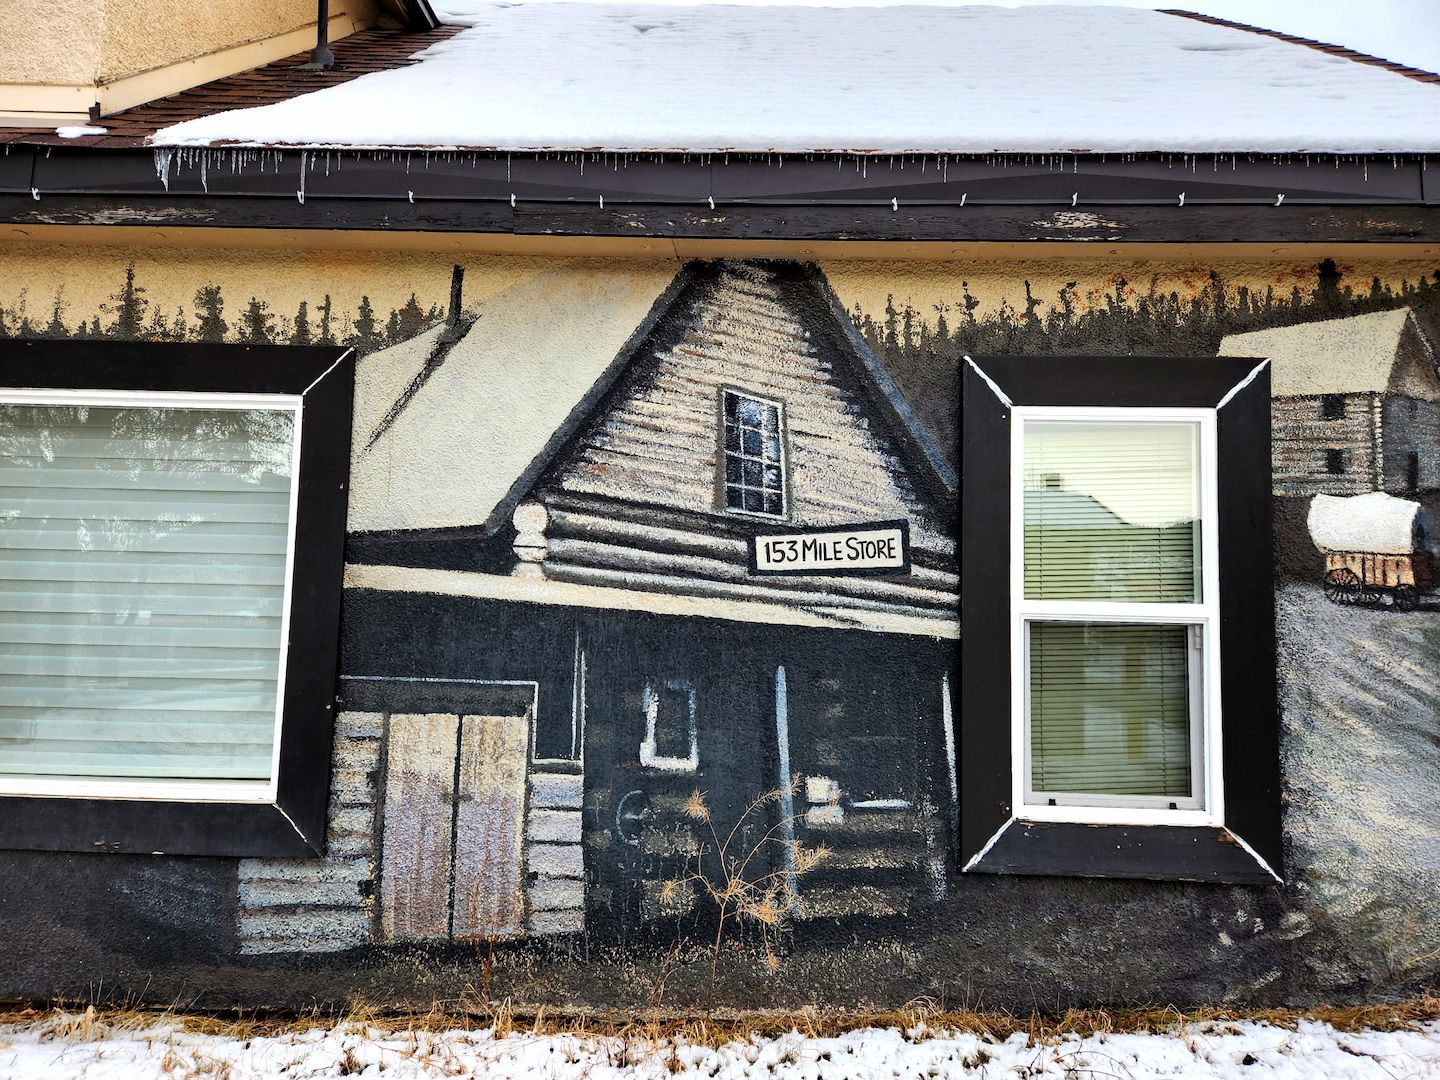 Photo of a mural on a wall in Williams Lake, depicting the pioneer building for 153 Mile Store.